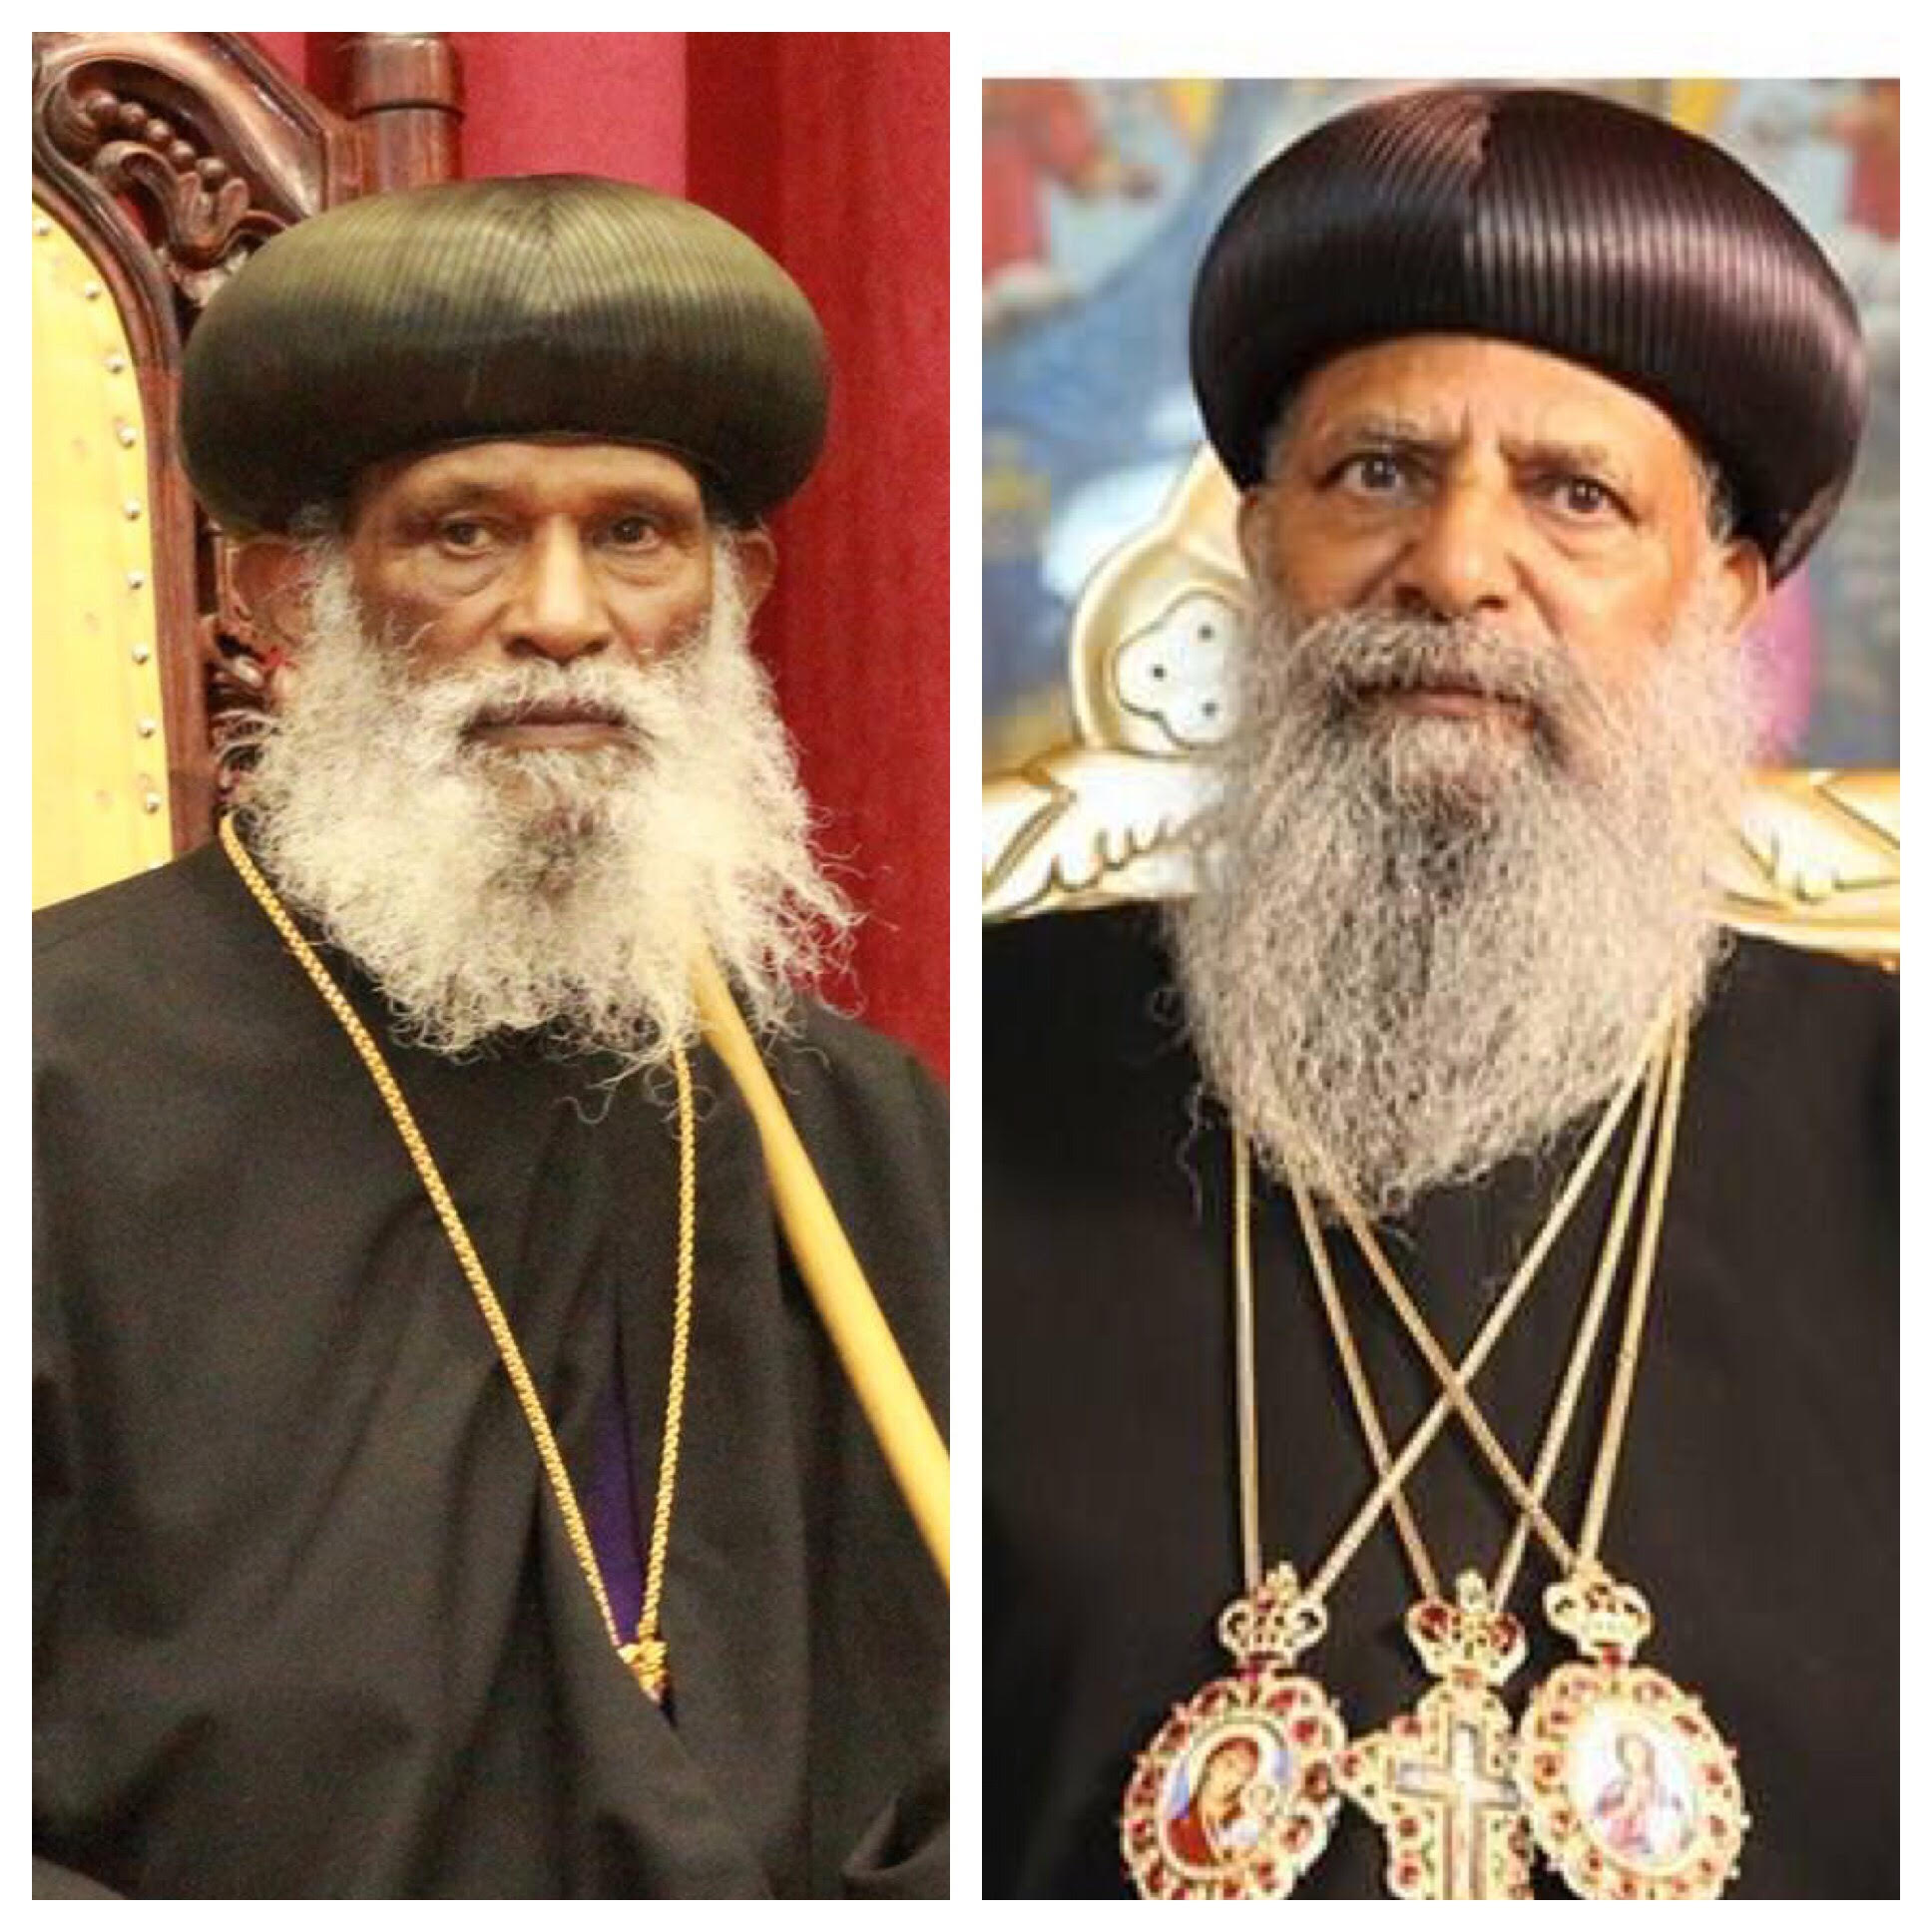 An End to the Ethiopian Schism in Sight?